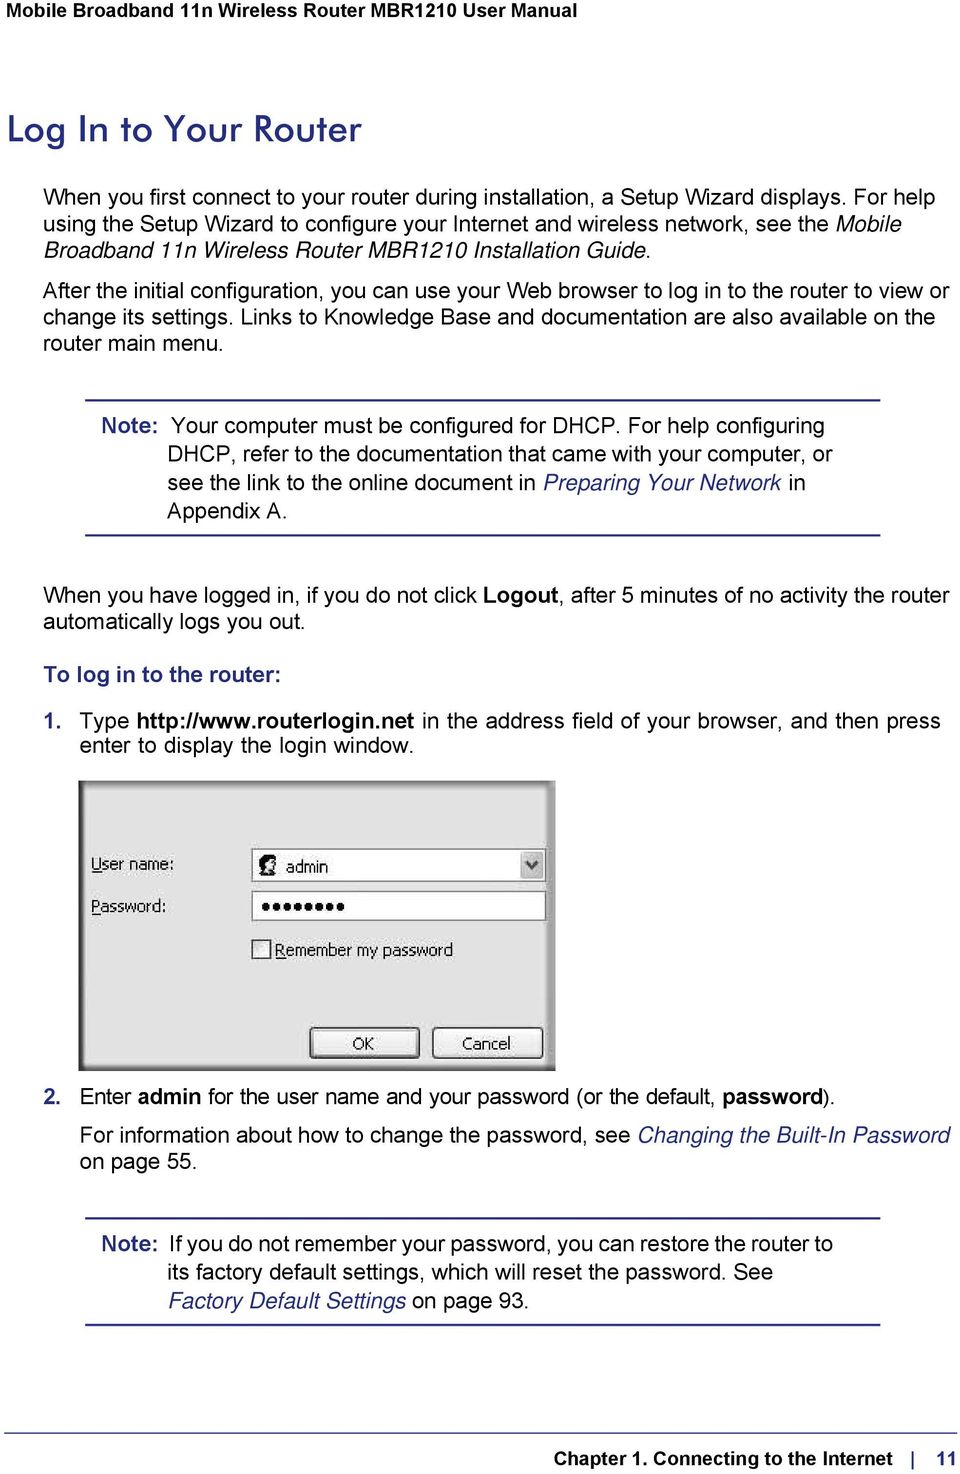 After the initial configuration, you can use your Web browser to log in to the router to view or change its settings.